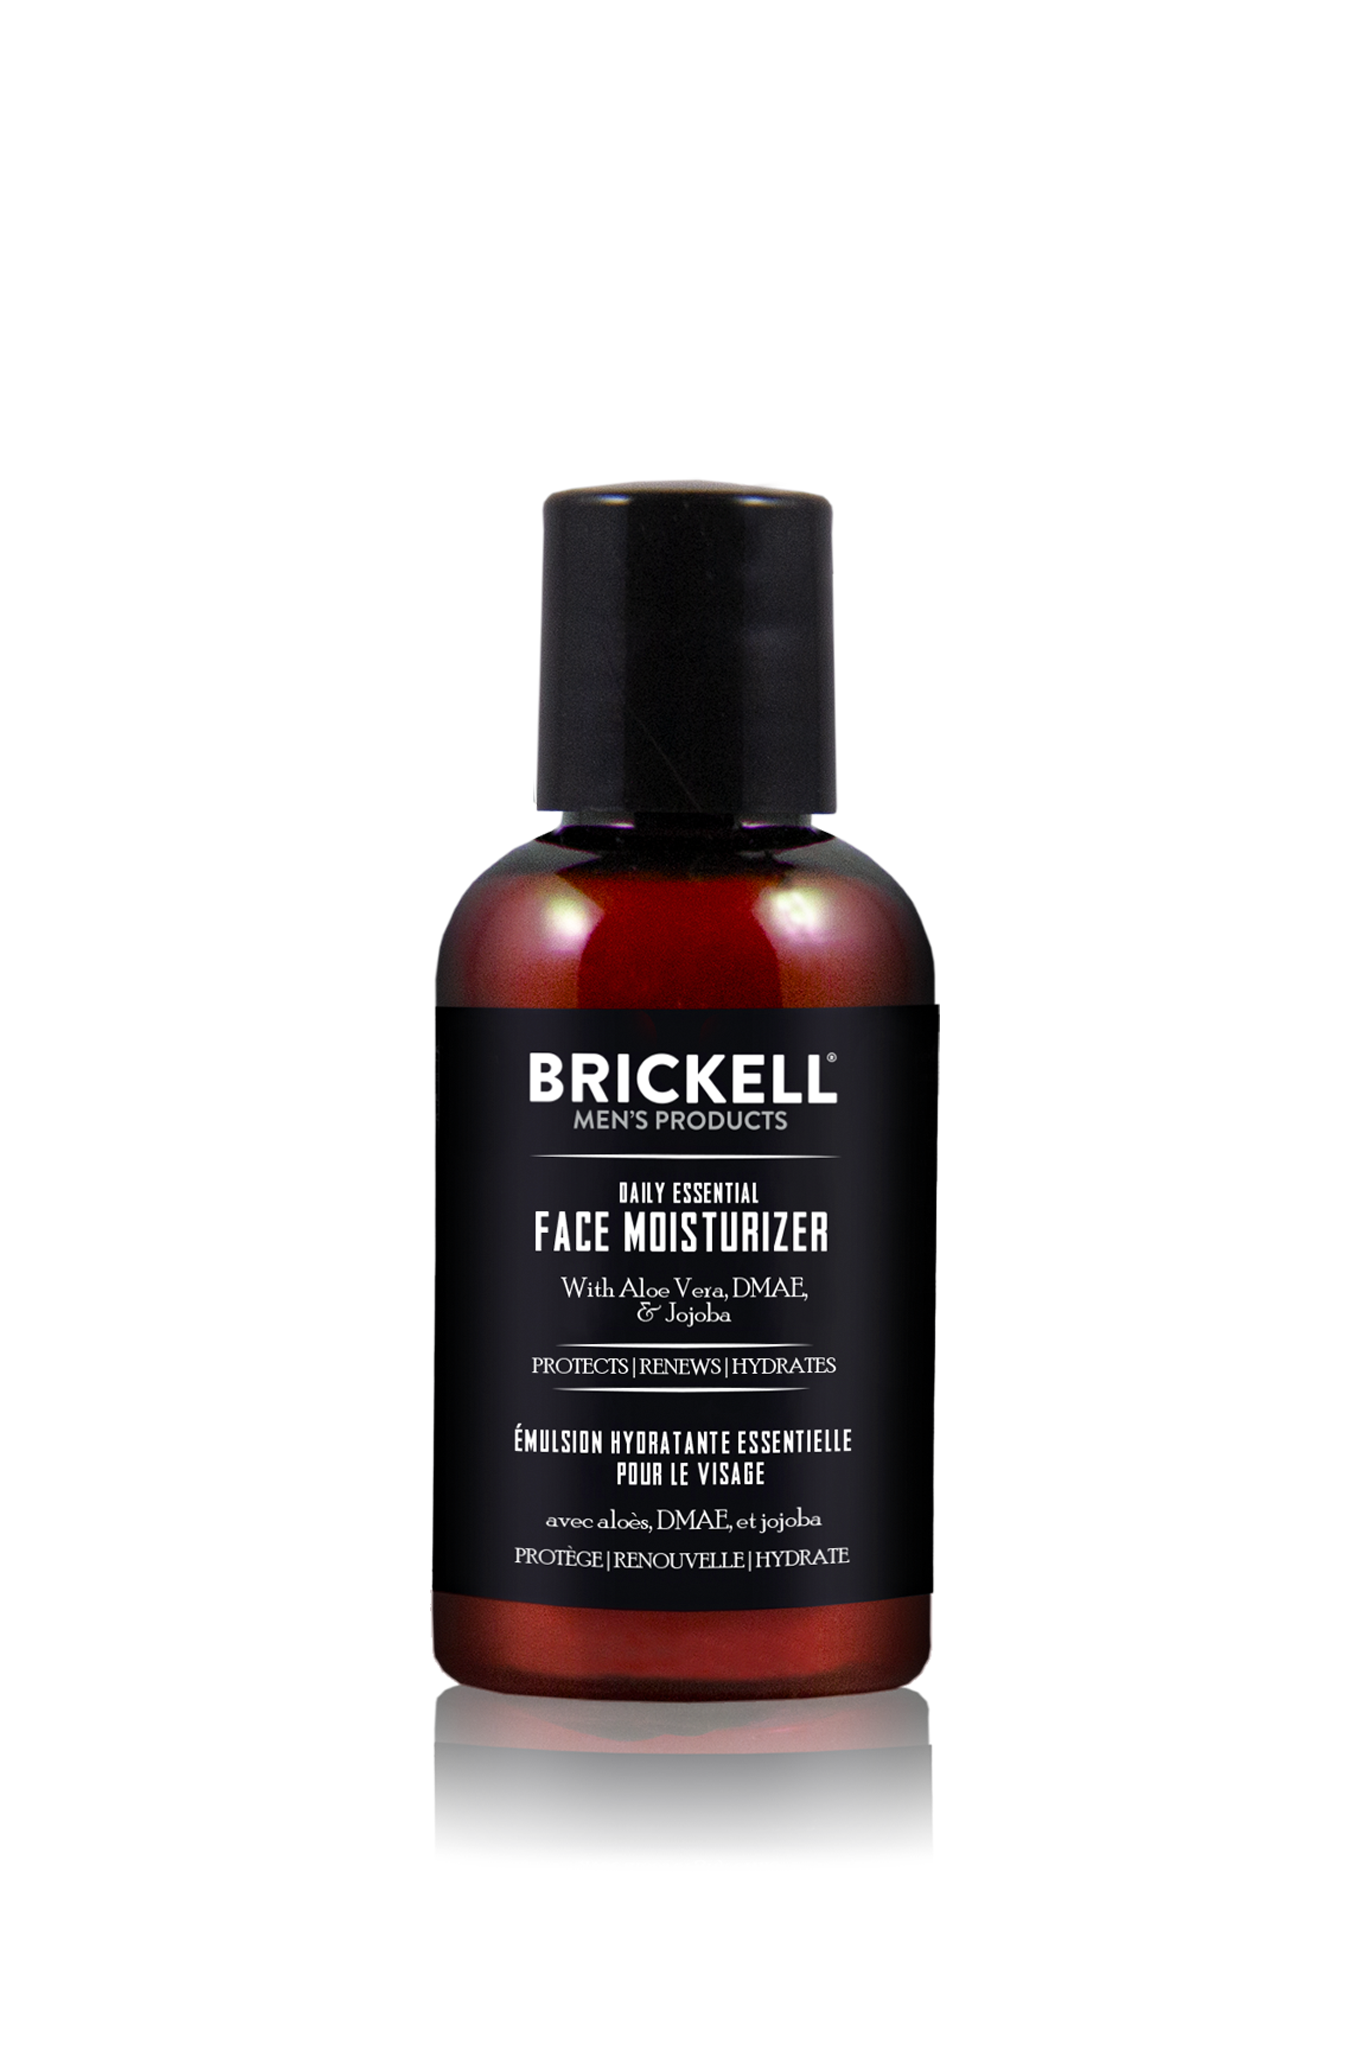 https://cdn.shopify.com/s/files/1/0513/2409/t/30/assets/TS_DAILY-ESSENTIAL-FACE-MOISTURIZER168433231409918.png?v=1684332317